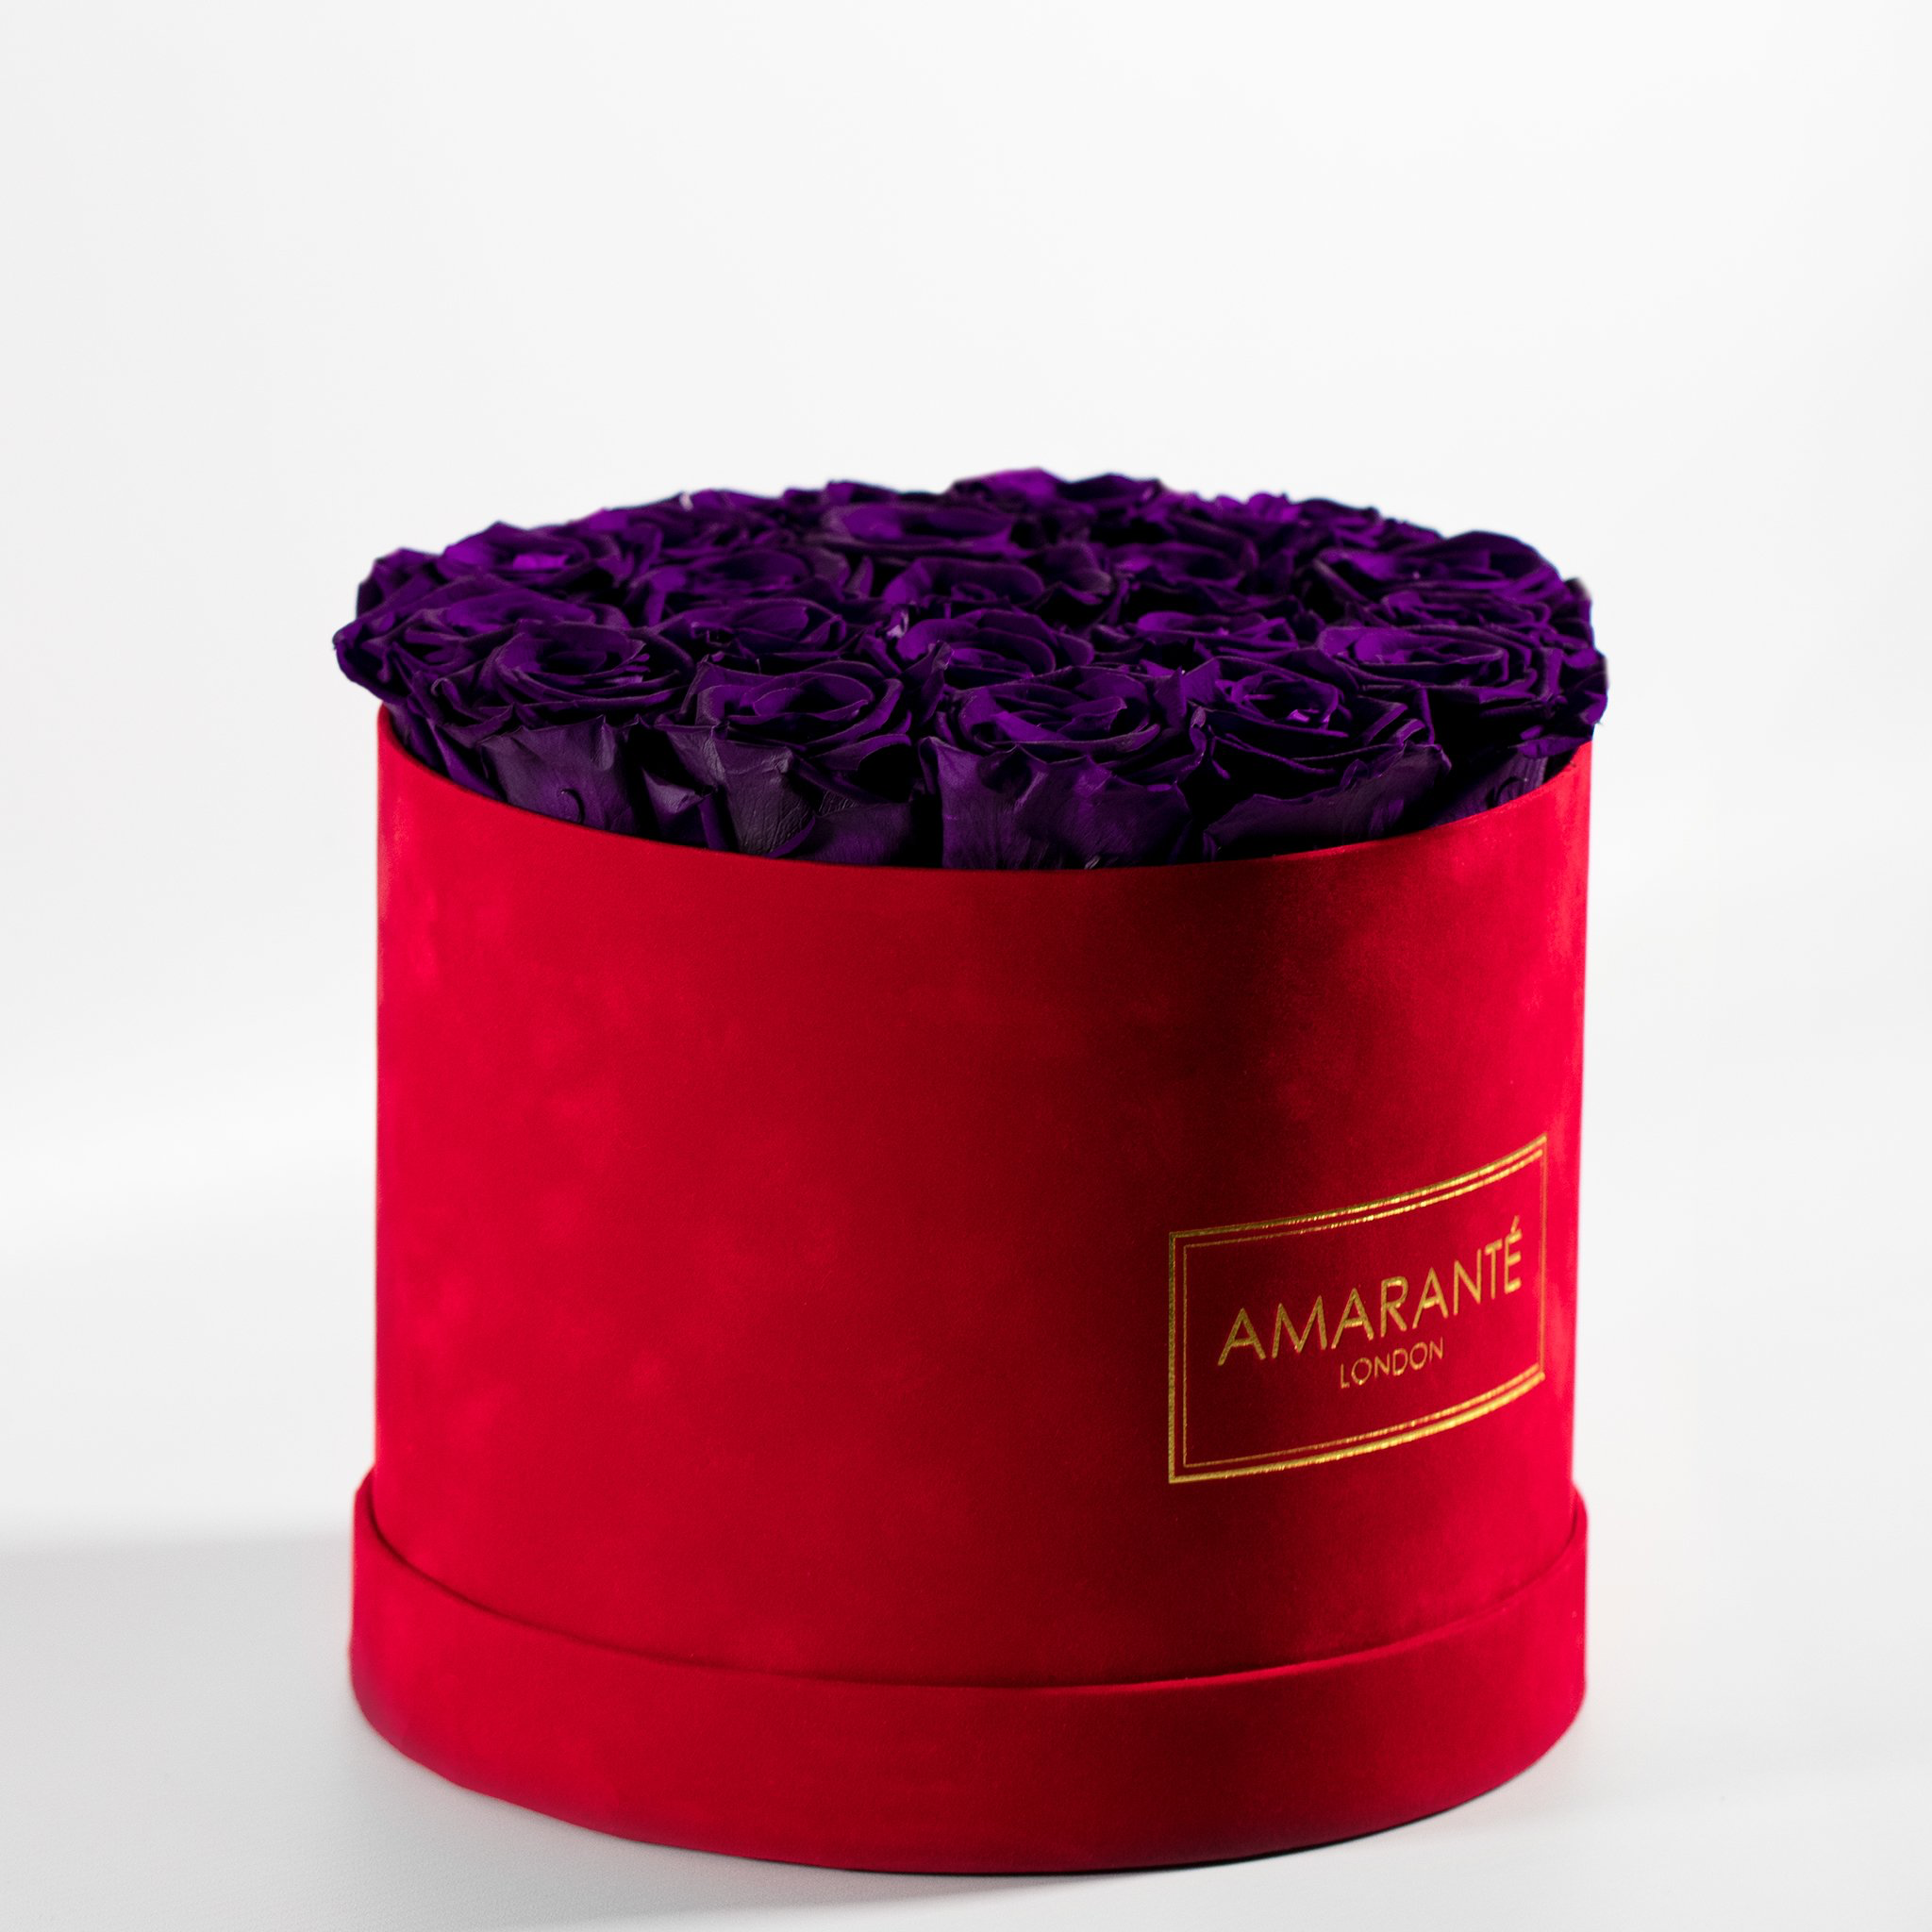 Enchanting dark purple Roses encompassed in a delicate red box 